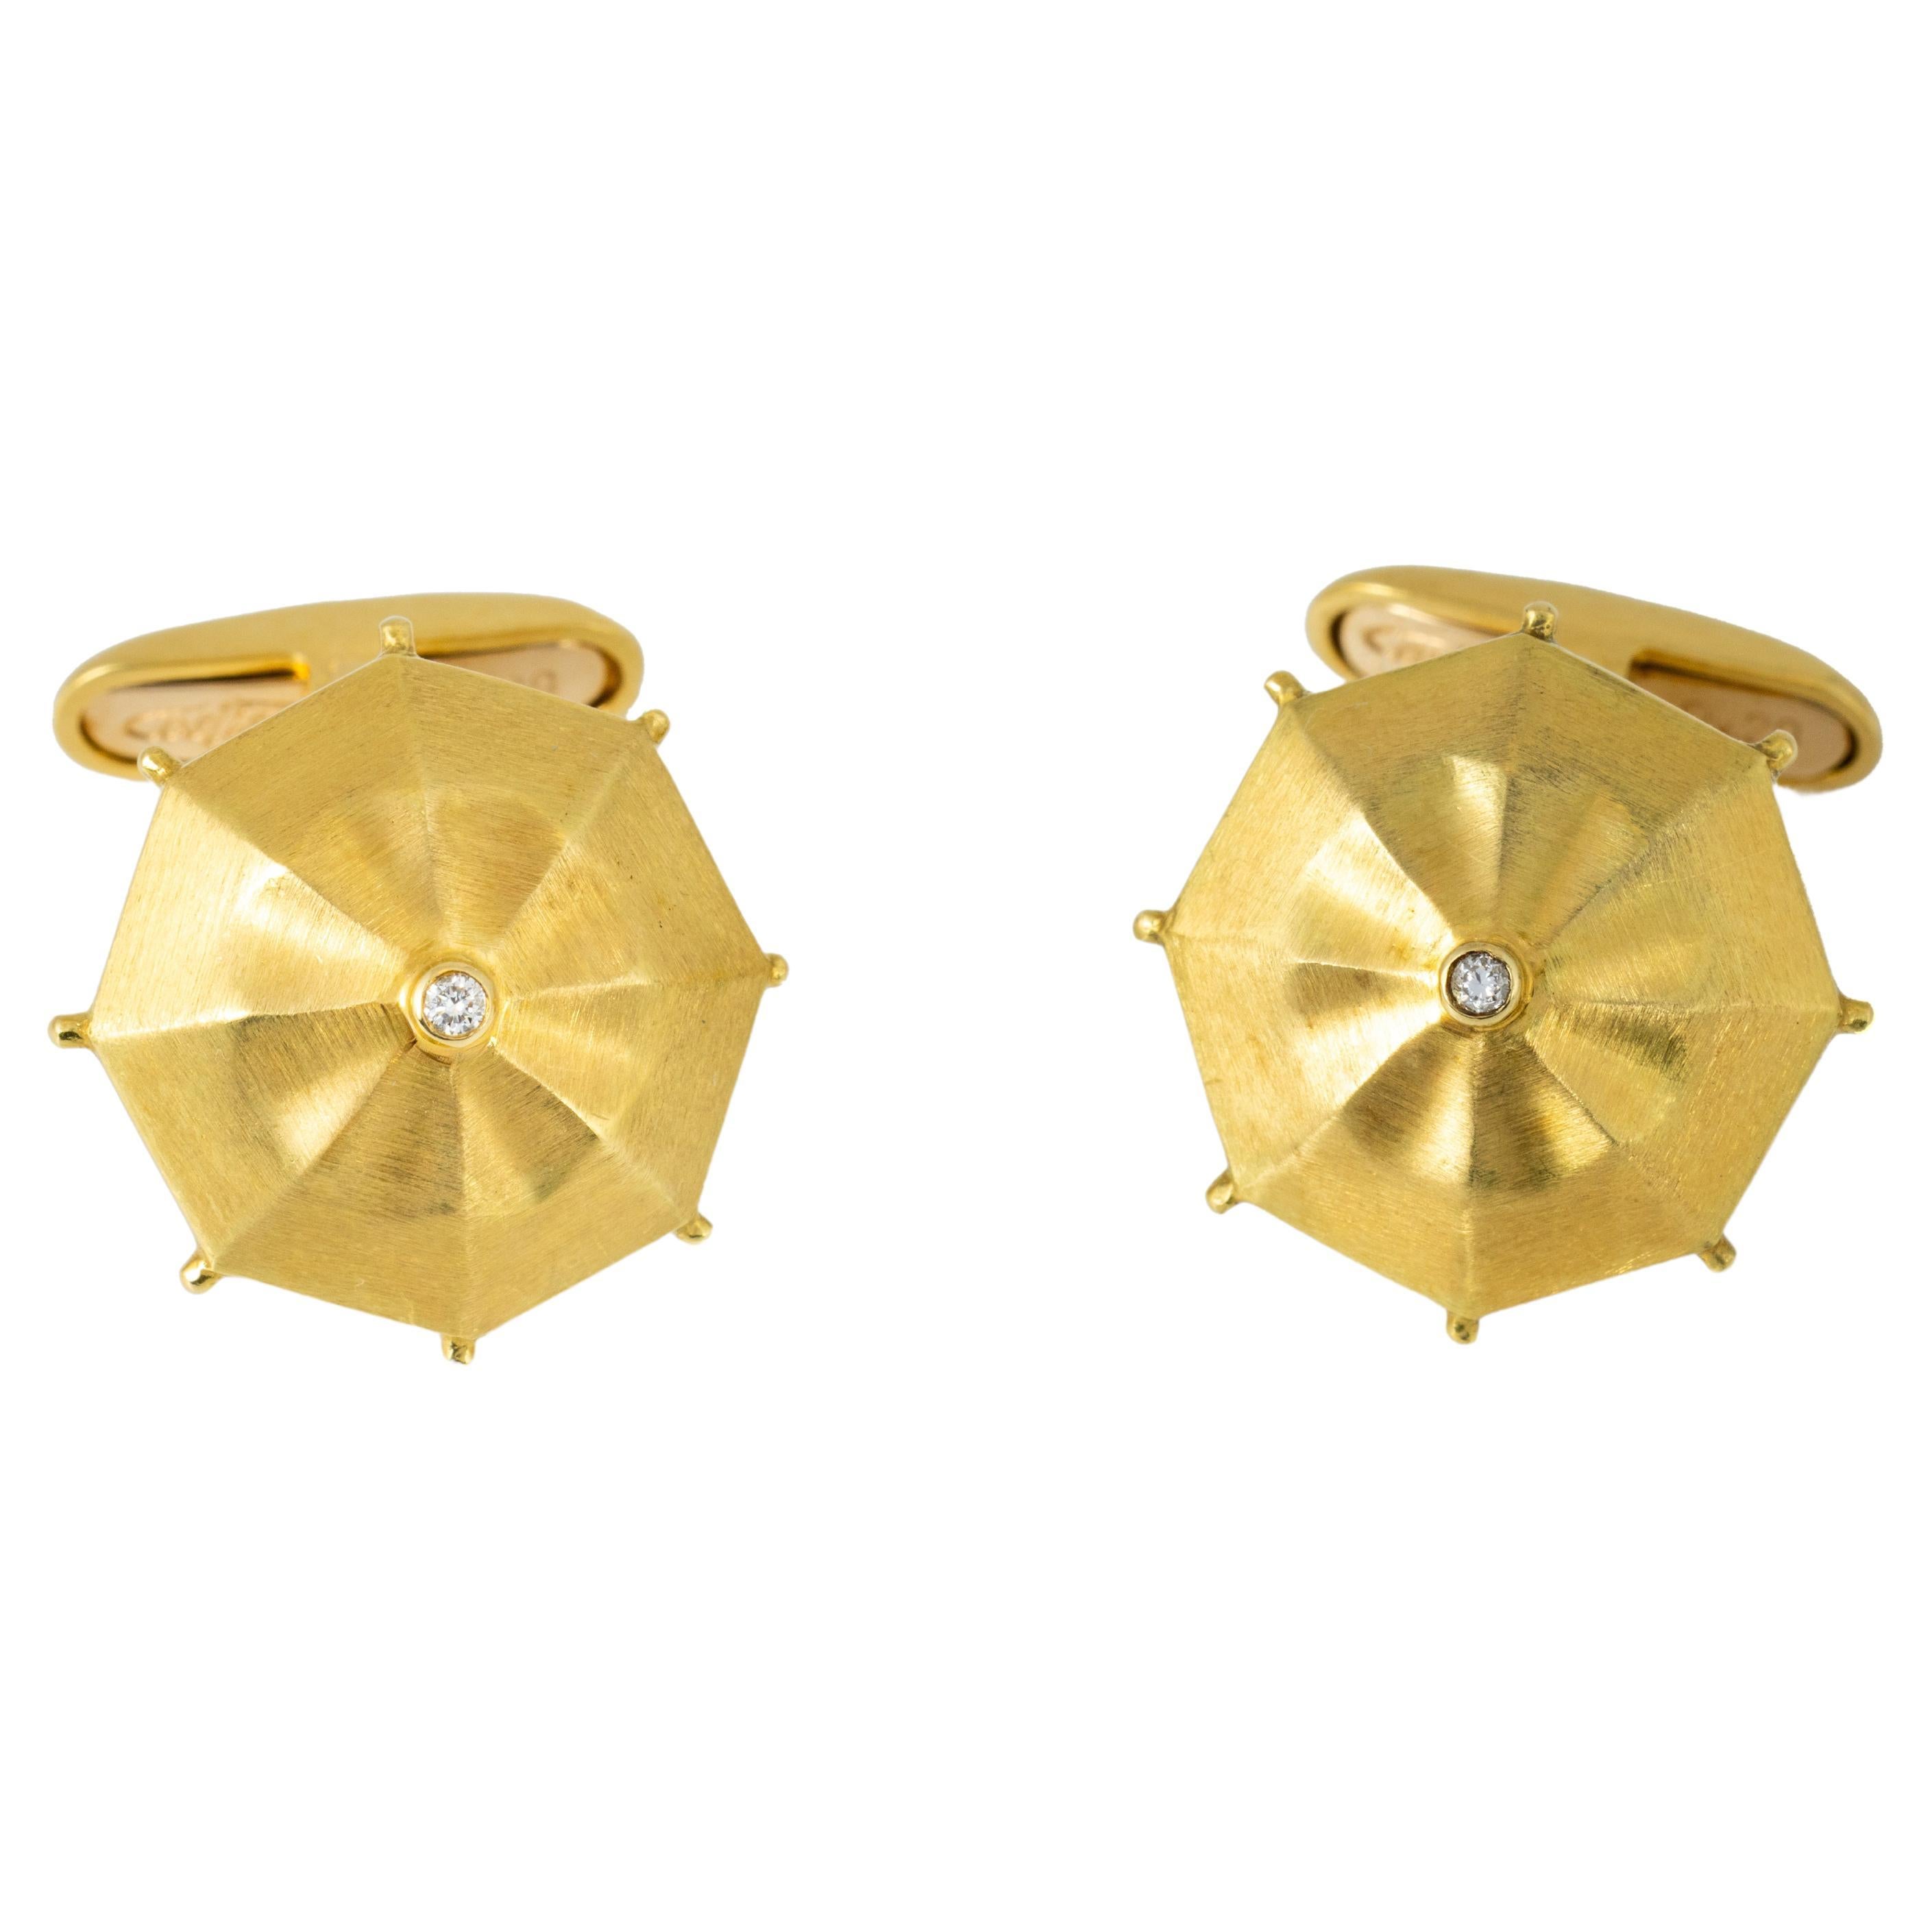 "Costis" Umbrella Collection Cufflinks YG with 0.04 carats Diamond on the center